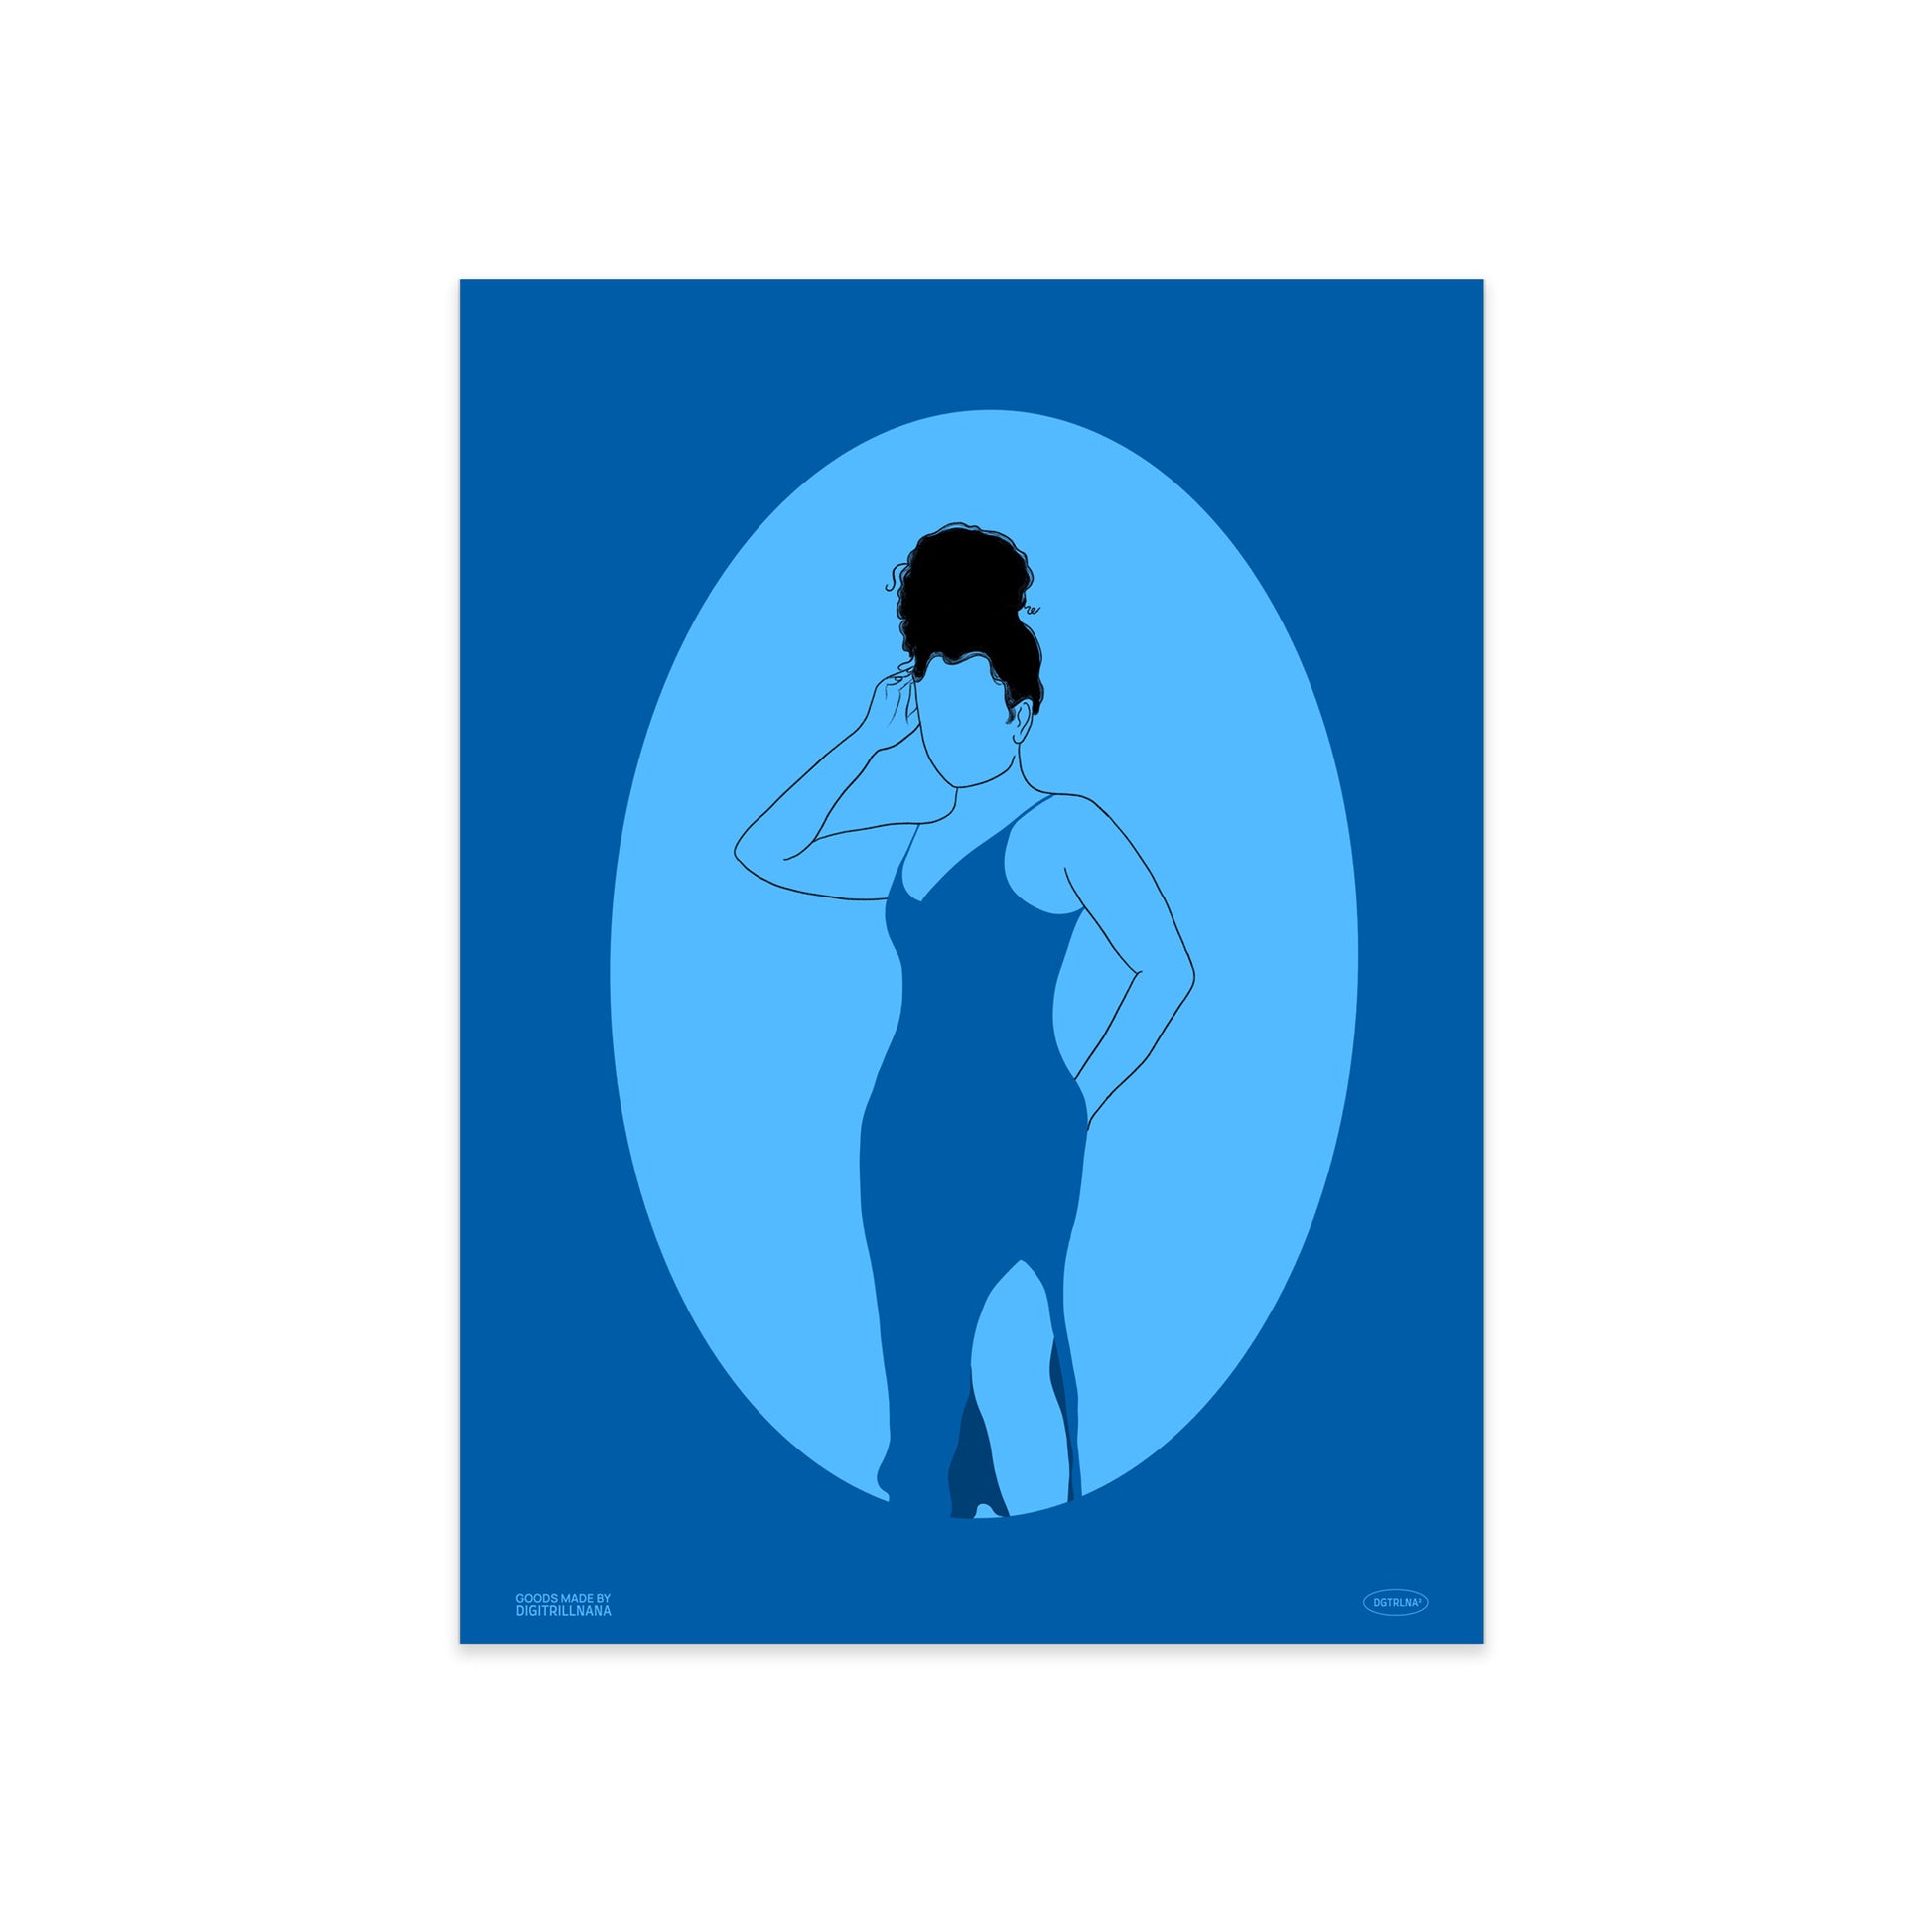 A series of four vibrant monochromatic illustrations of black women figures in the hues orange, blue, and teal. The illustration features a silhouette oval with a women’s figure inside. Light and dark colors create an optical illusion with positive and negative space. Silhouette 3: Illustration of a blue monochrome silhouette front view of a figure posing in a dress with one hand by her head and the other behind her with her hair in a curly bun. 